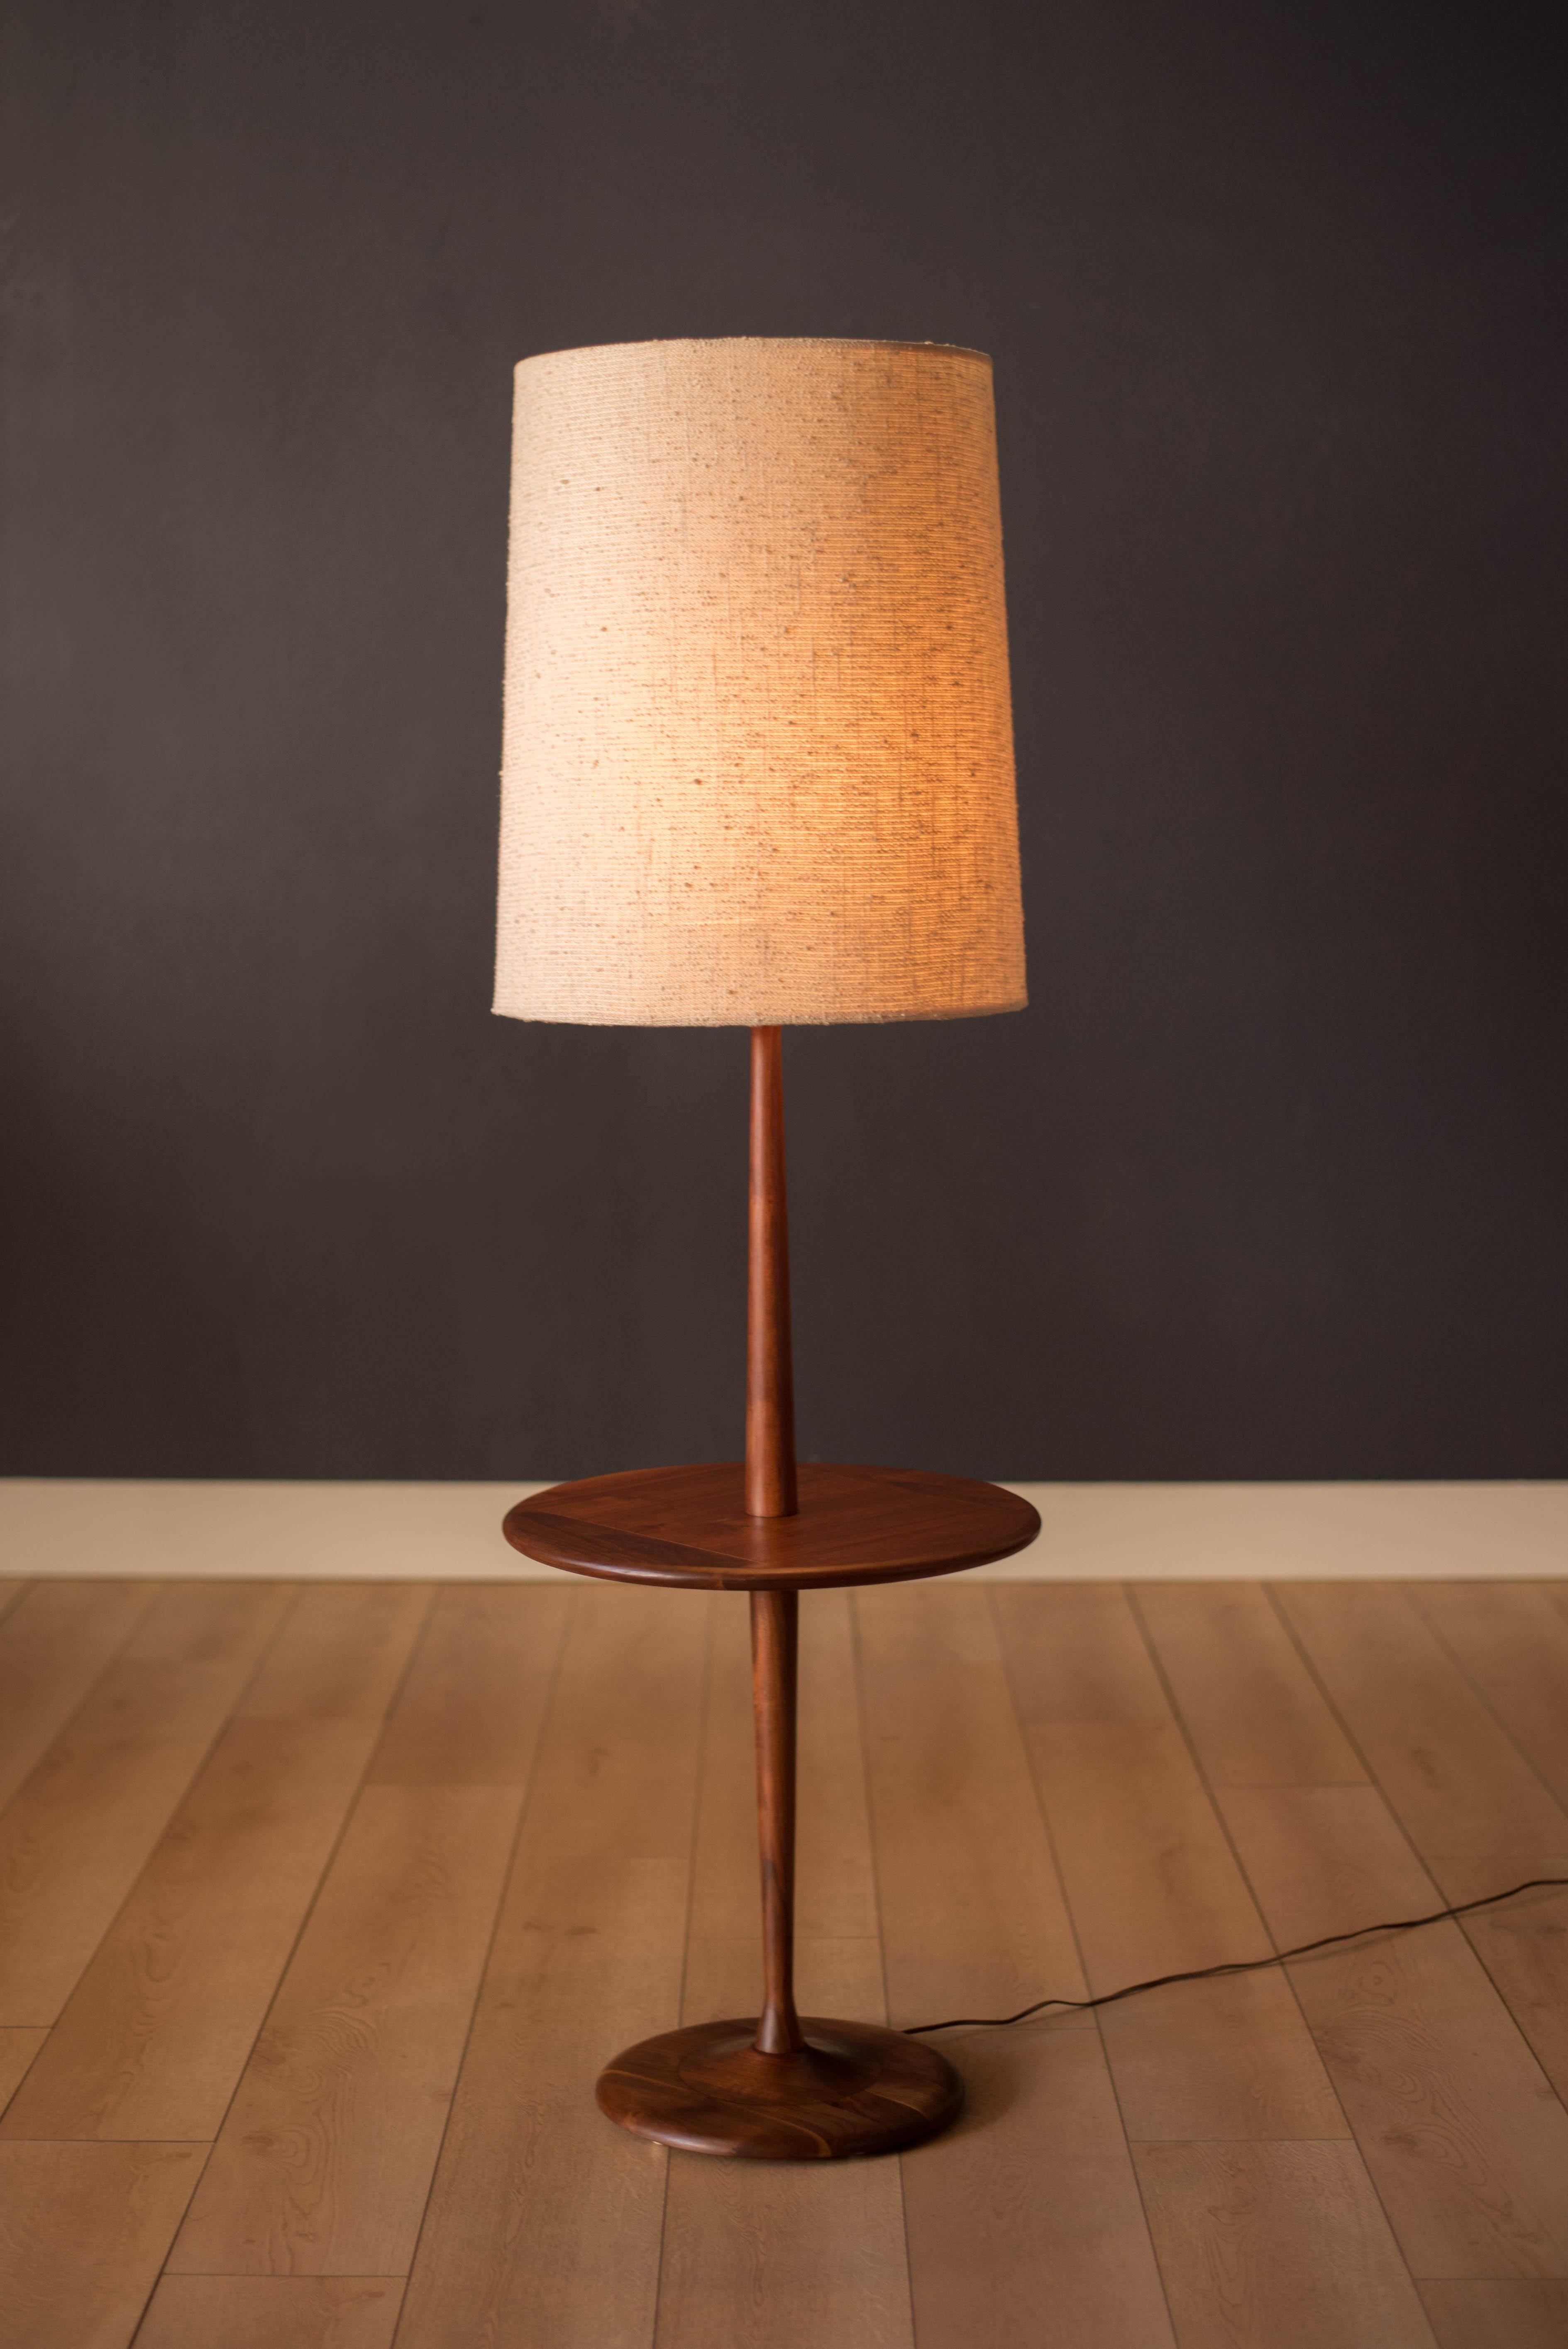 Vintage floor lamp with attached round side table by Laurel Lamp Co. circa 1960s. This piece is made of solid walnut and functions with a three-way switch. Drum shade is not included. 

End table height 20.75